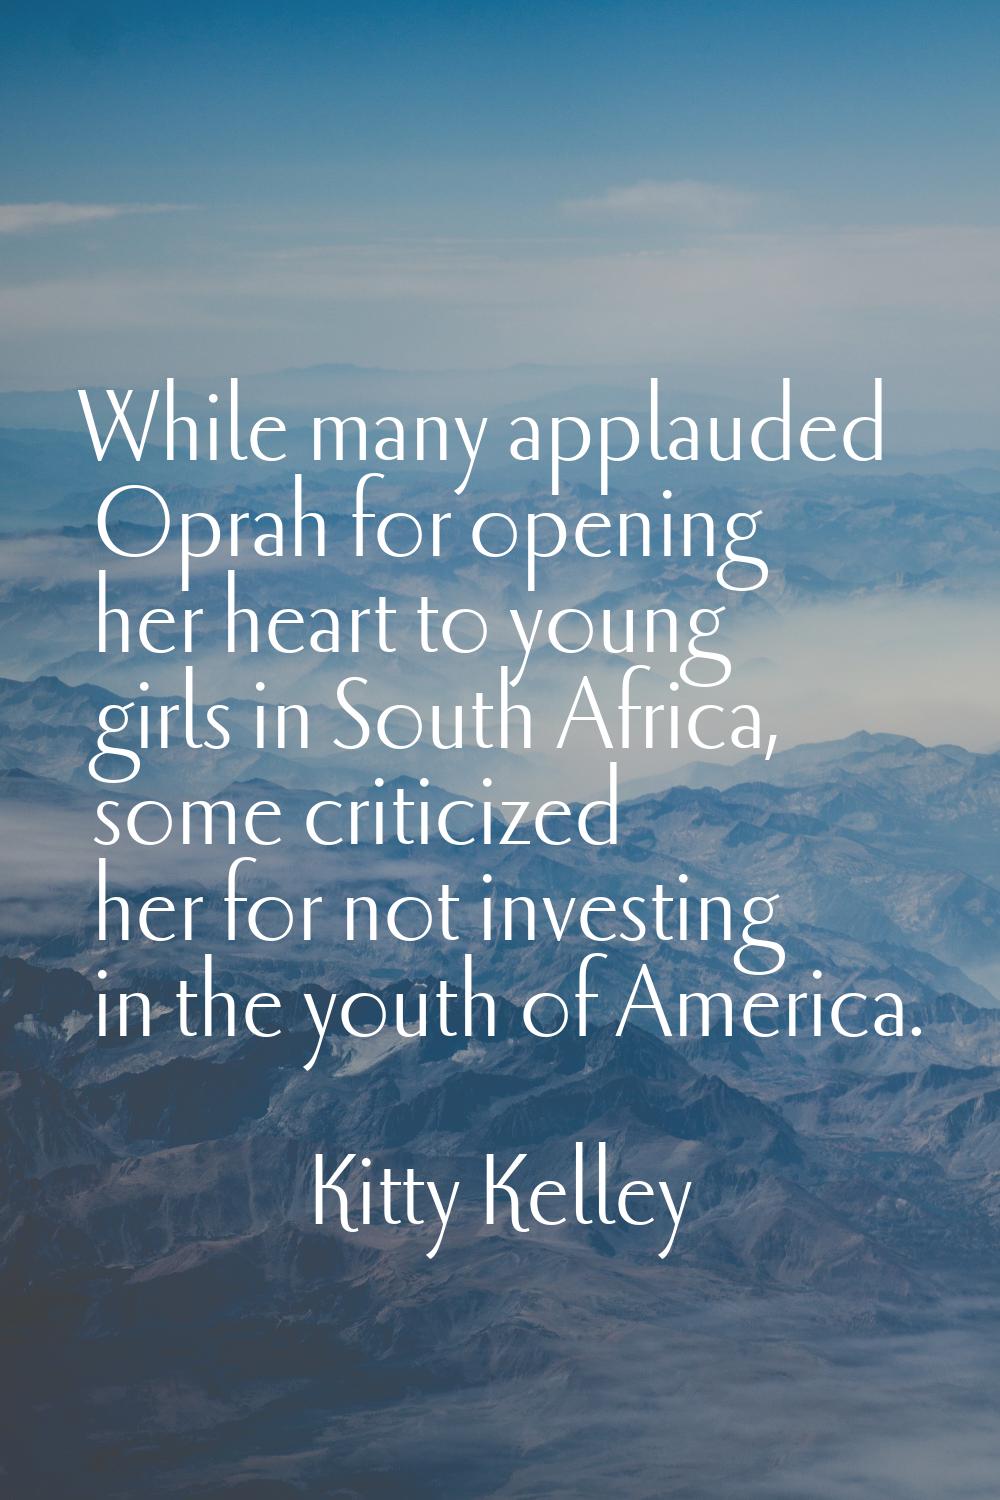 While many applauded Oprah for opening her heart to young girls in South Africa, some criticized he